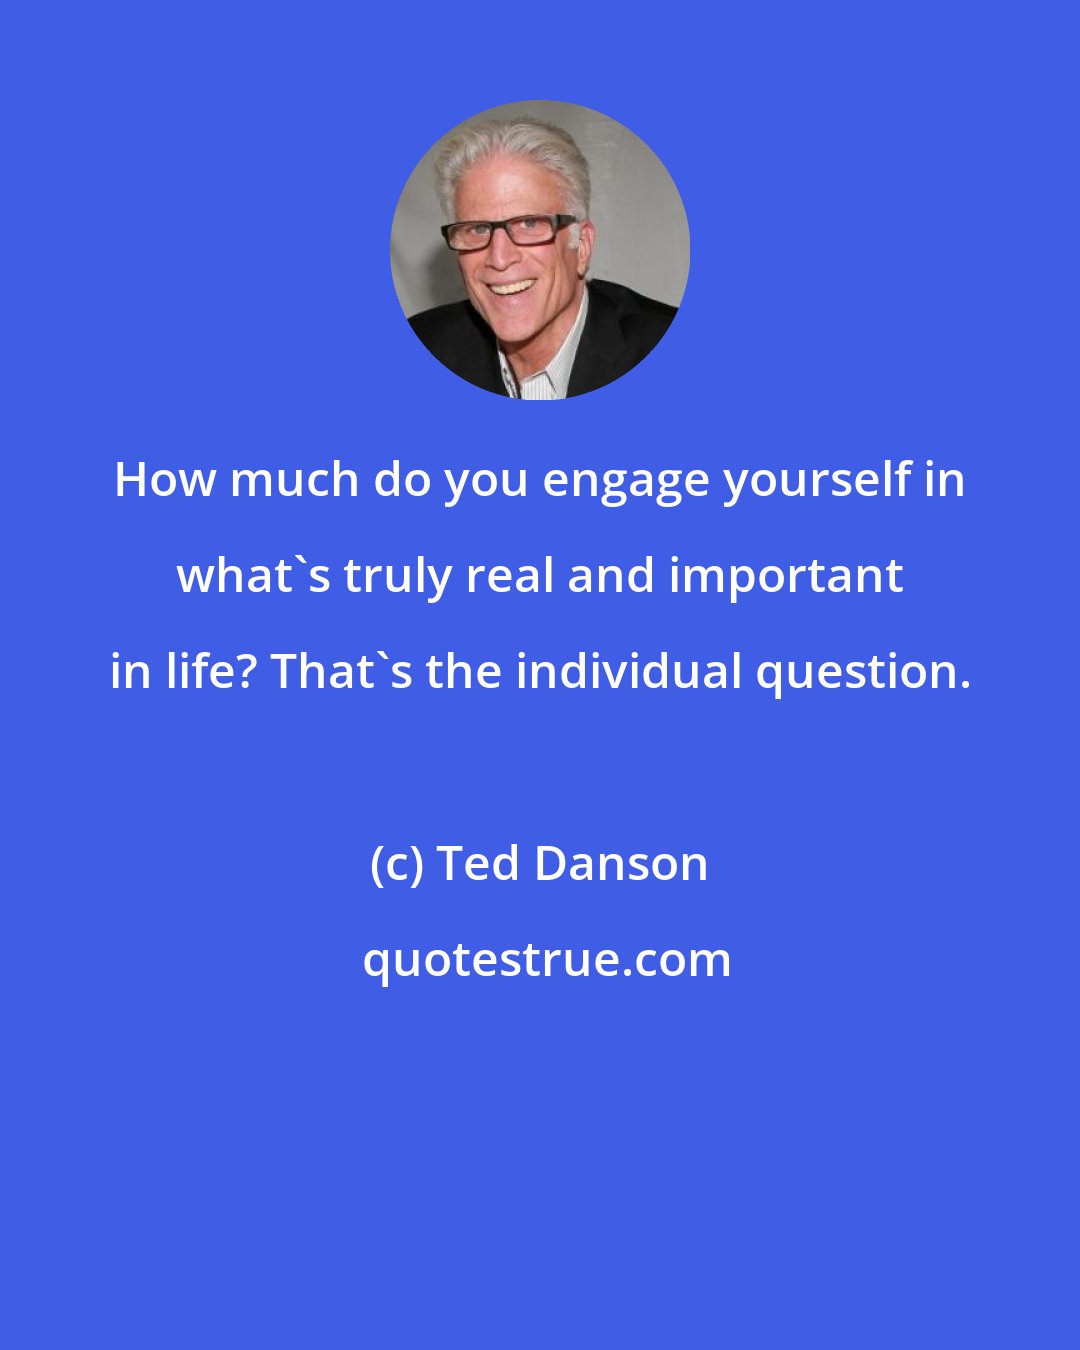 Ted Danson: How much do you engage yourself in what's truly real and important in life? That's the individual question.